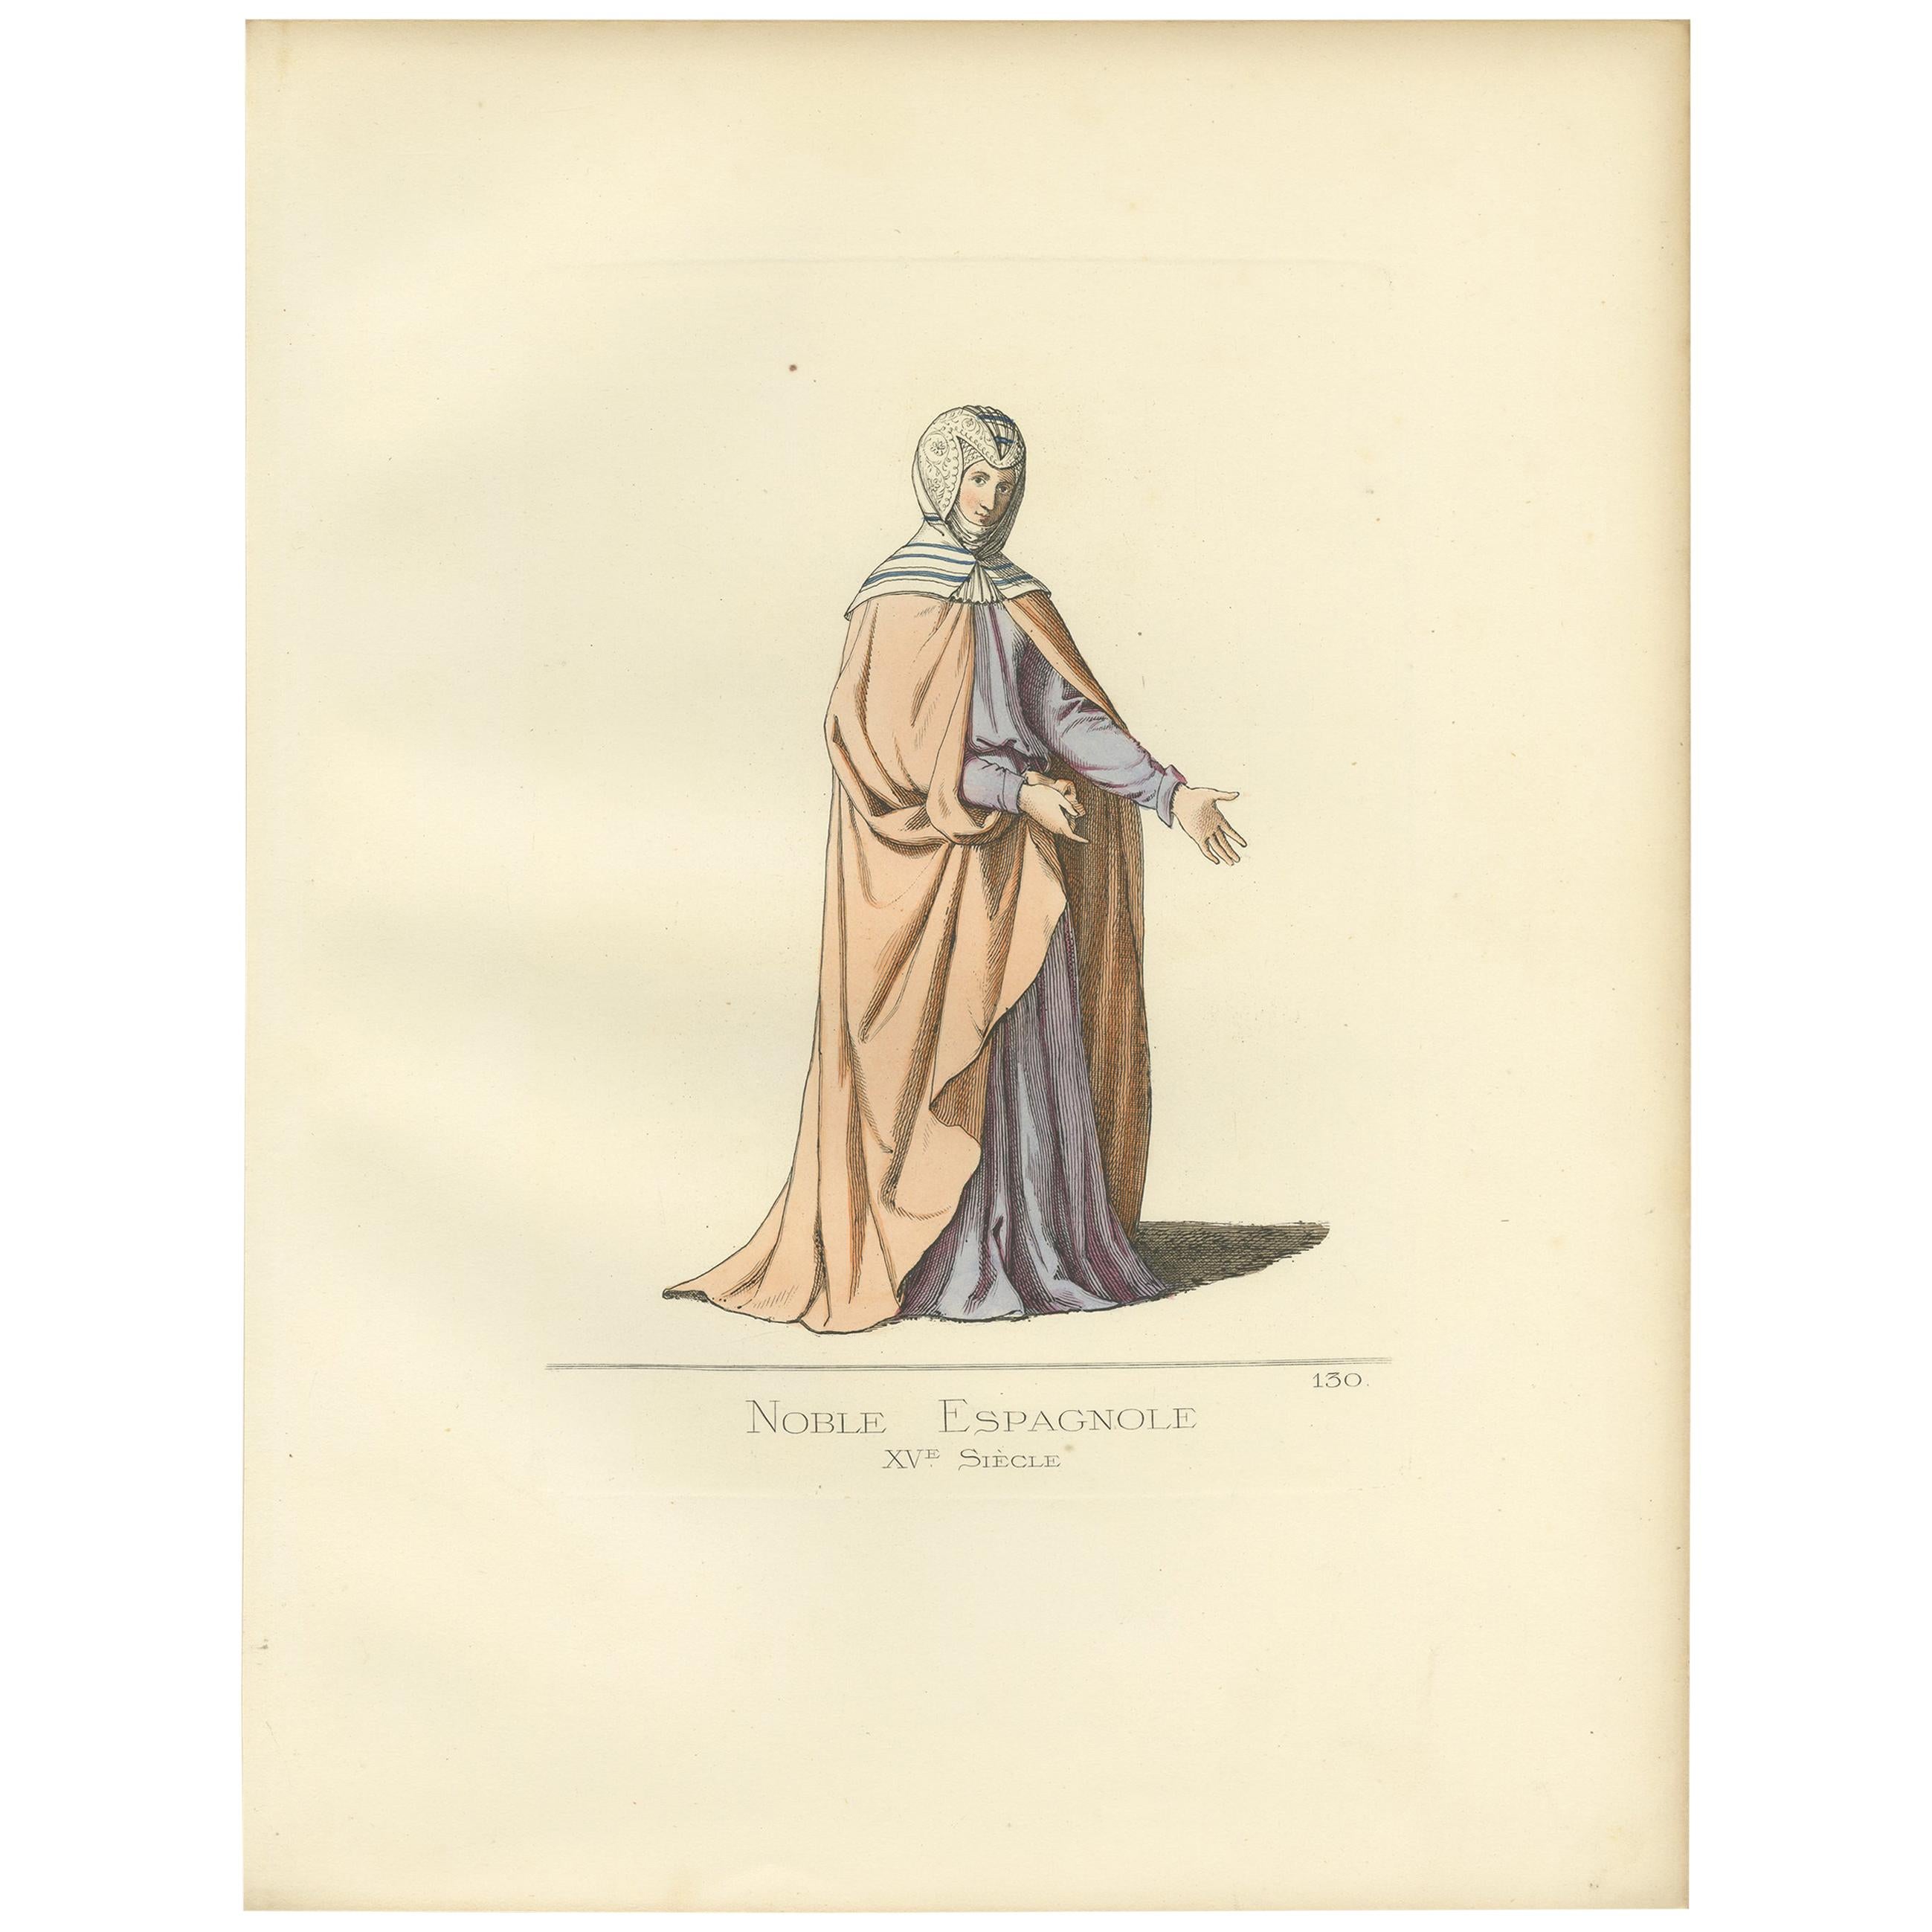 Antique Print of a Spanish Noblewoman, 15th Century, by Bonnard, 1860